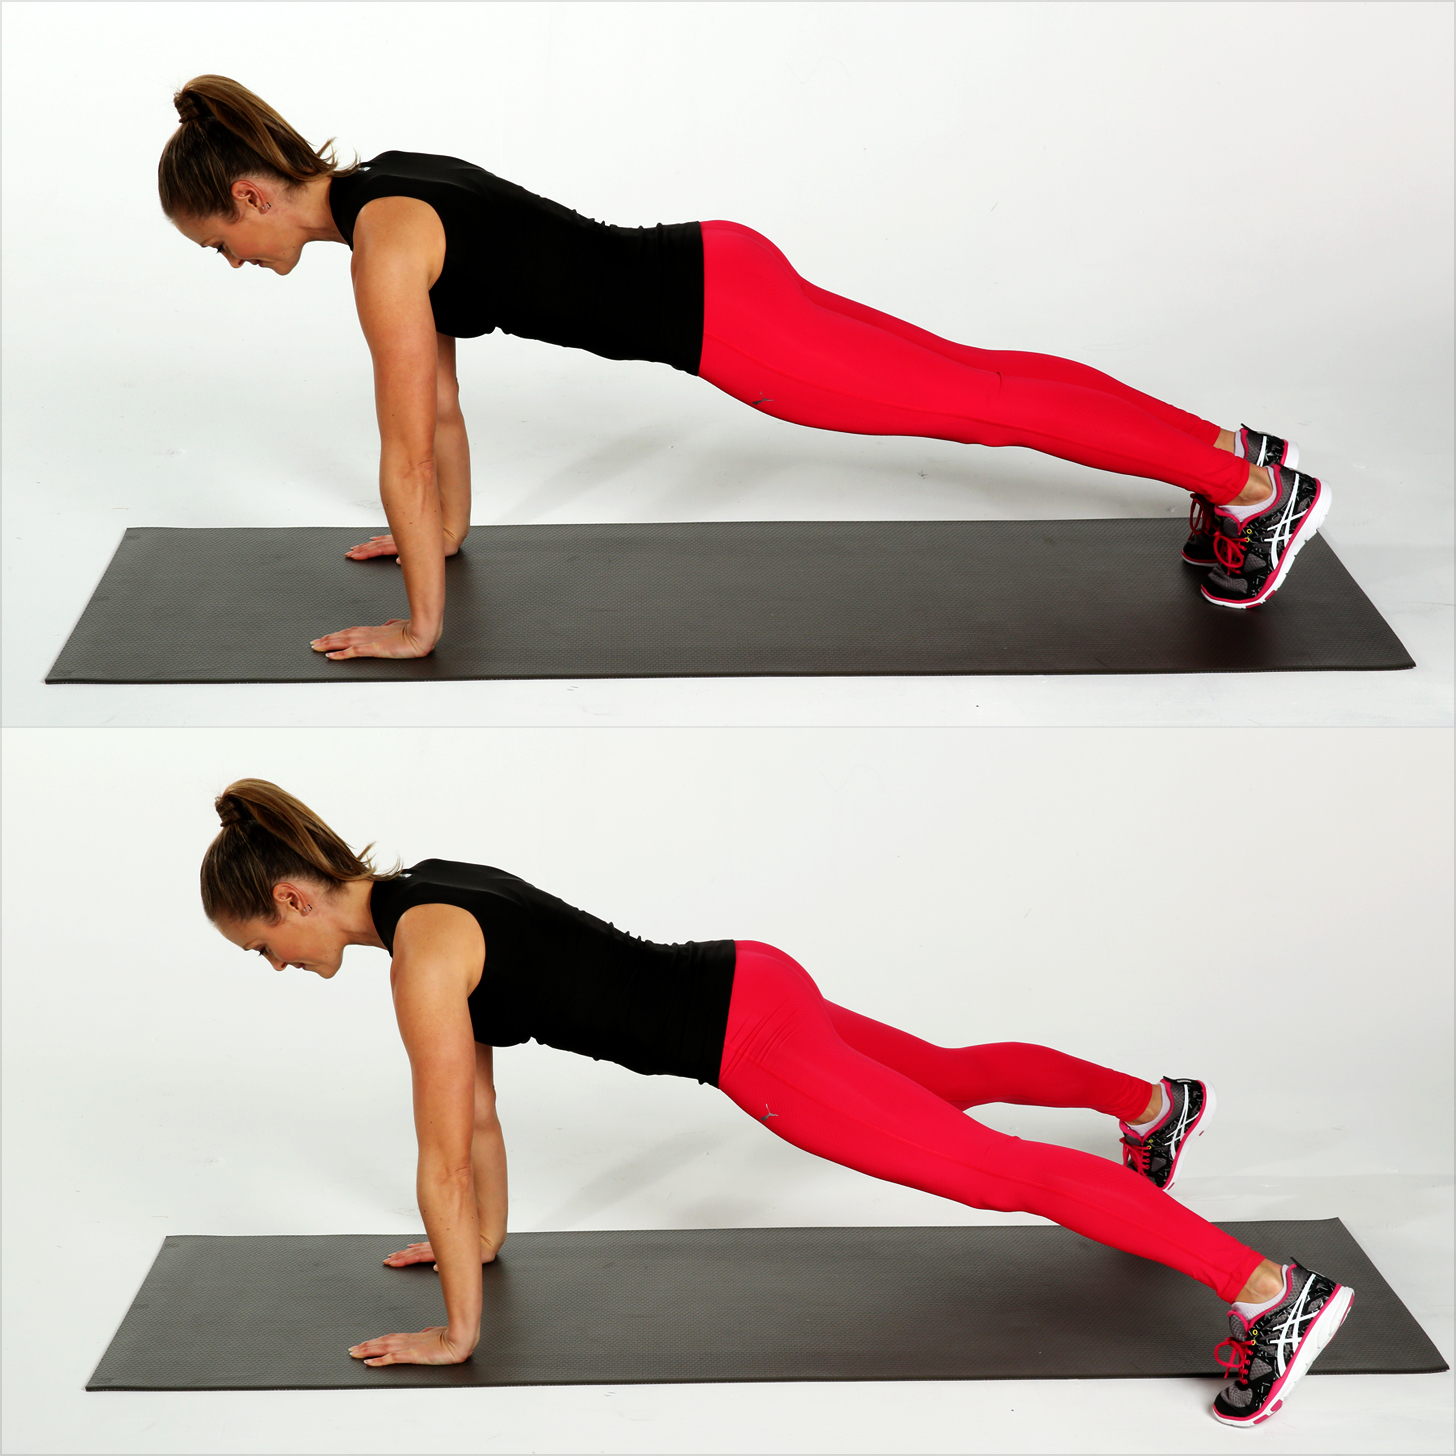 tuck jumps exercise